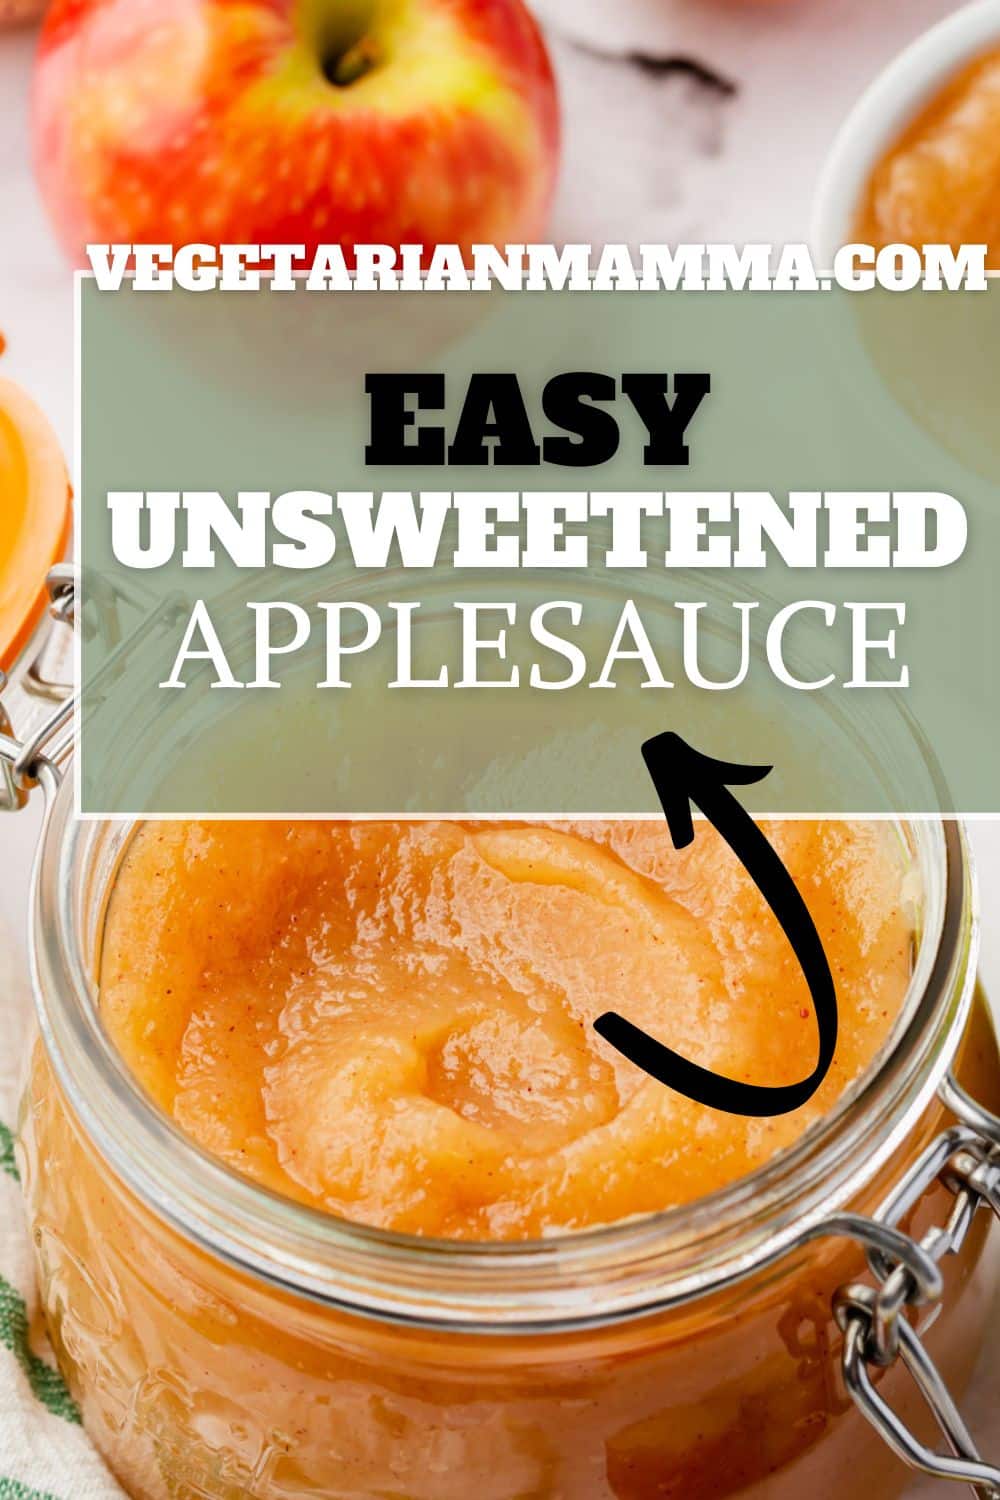 It is so simple to make your own Unsweetened Applesauce at home! It's simmered on the stove, and made with 3 ingredients in less than an hour.